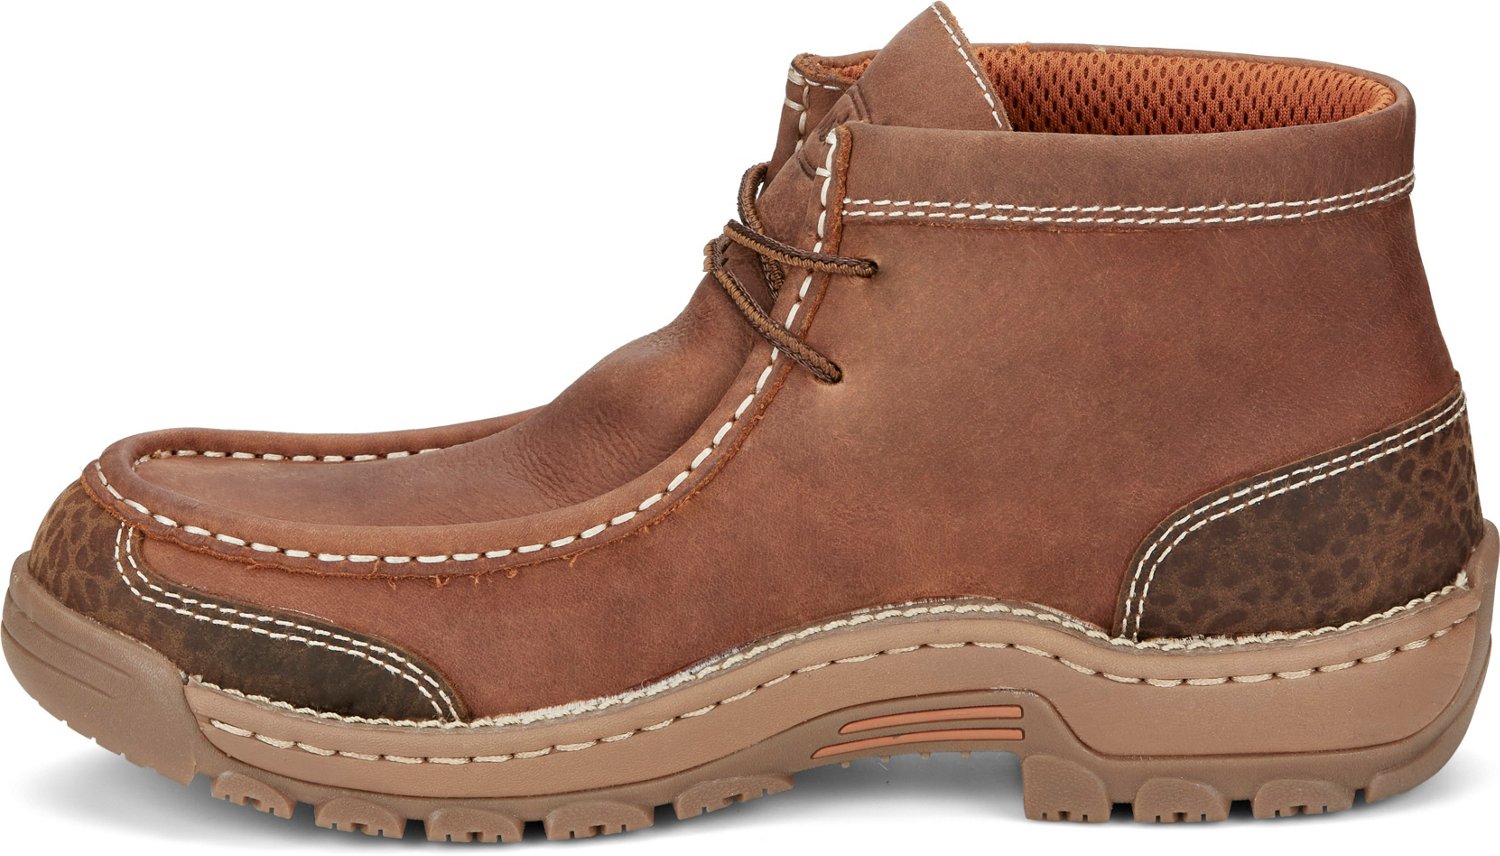 Justin Boots Men's Stampede Crafton Soft Toe Work Boots | Academy